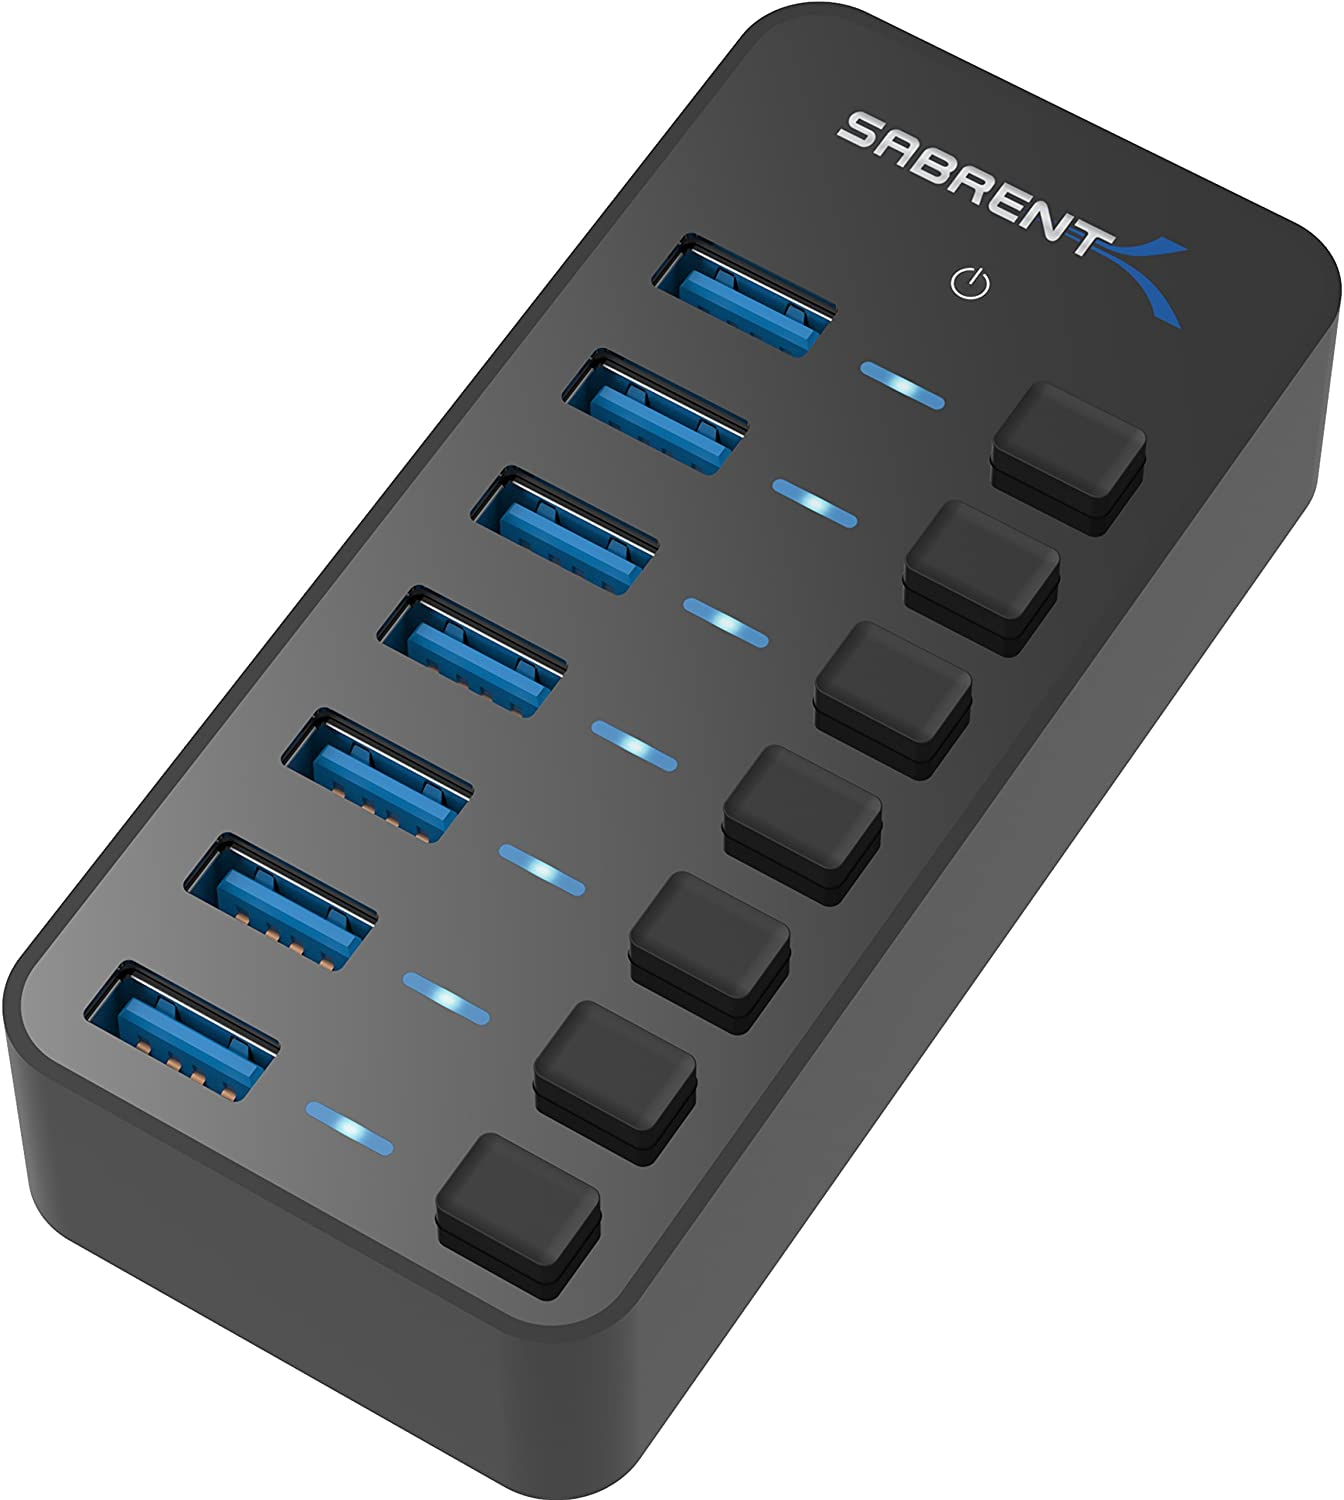 SABRENT 36W 7 Port USB 3.0 Hub with Individual Power Switches and LEDs Includes 36W 12V/3A Power Adapter (HB-BUP7)